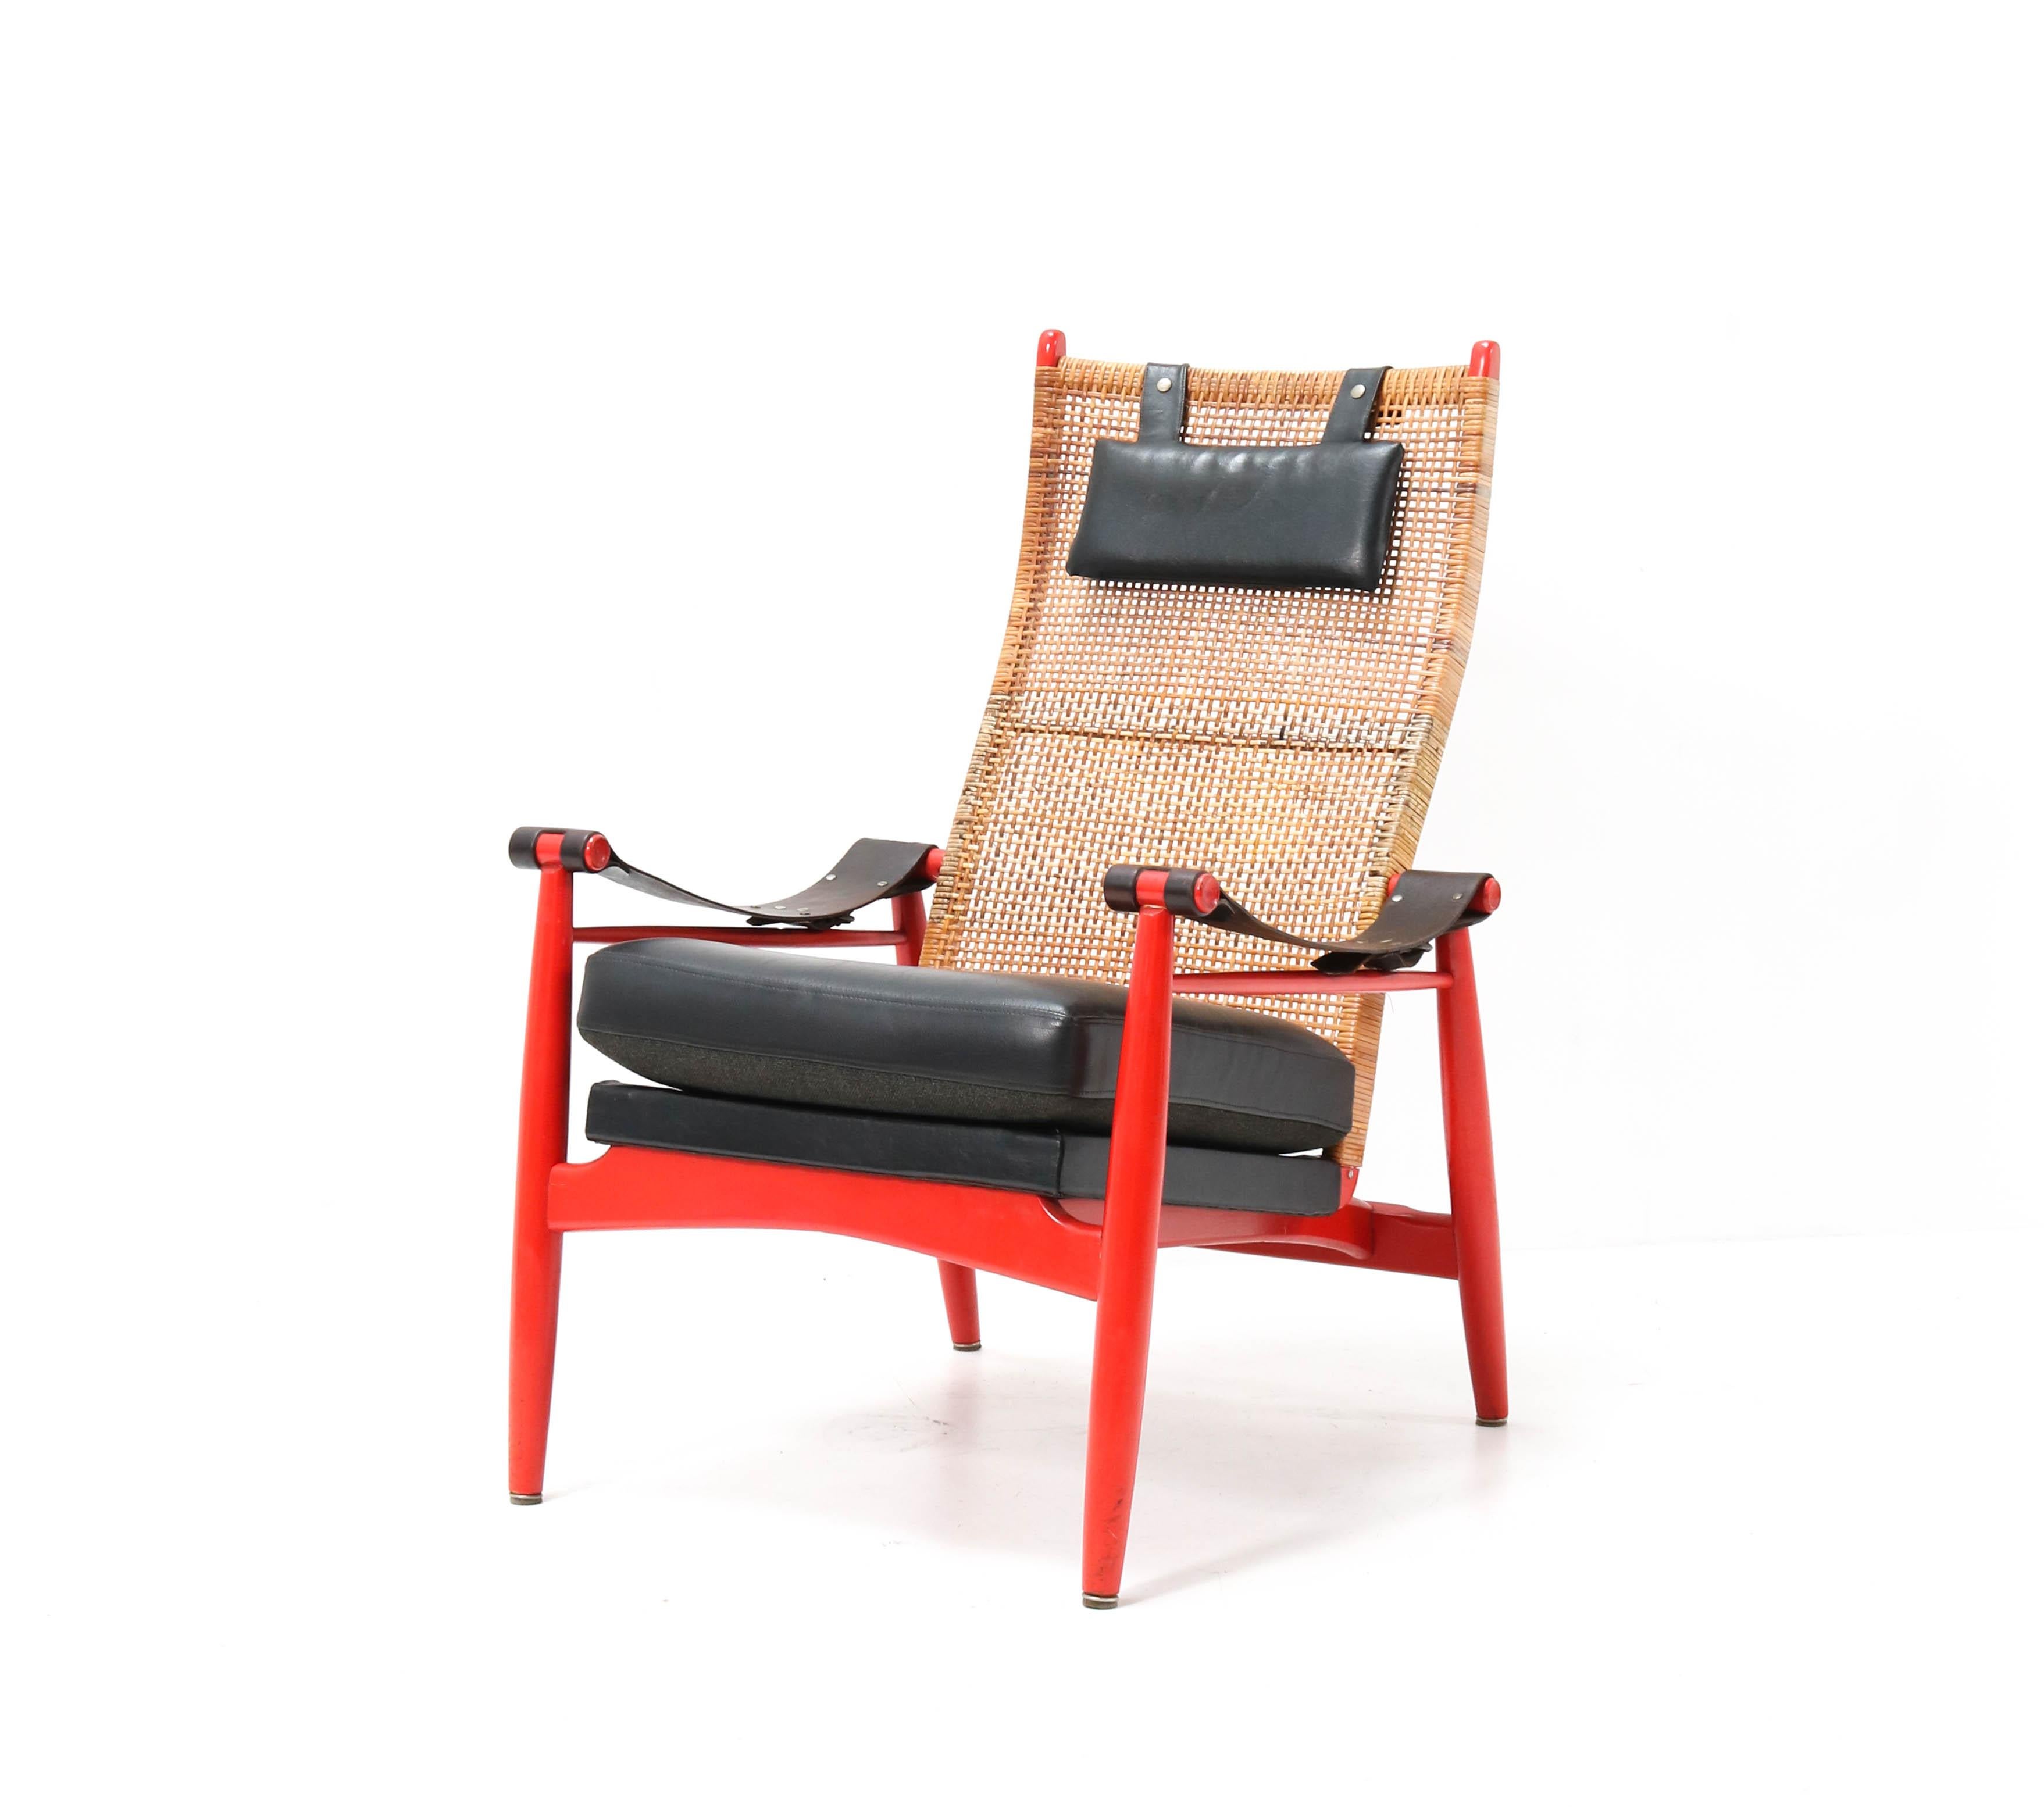 Lacquered Mid-Century Modern Lounge Chair by P.J. Muntendam for Gebroeders Jonker, 1950s